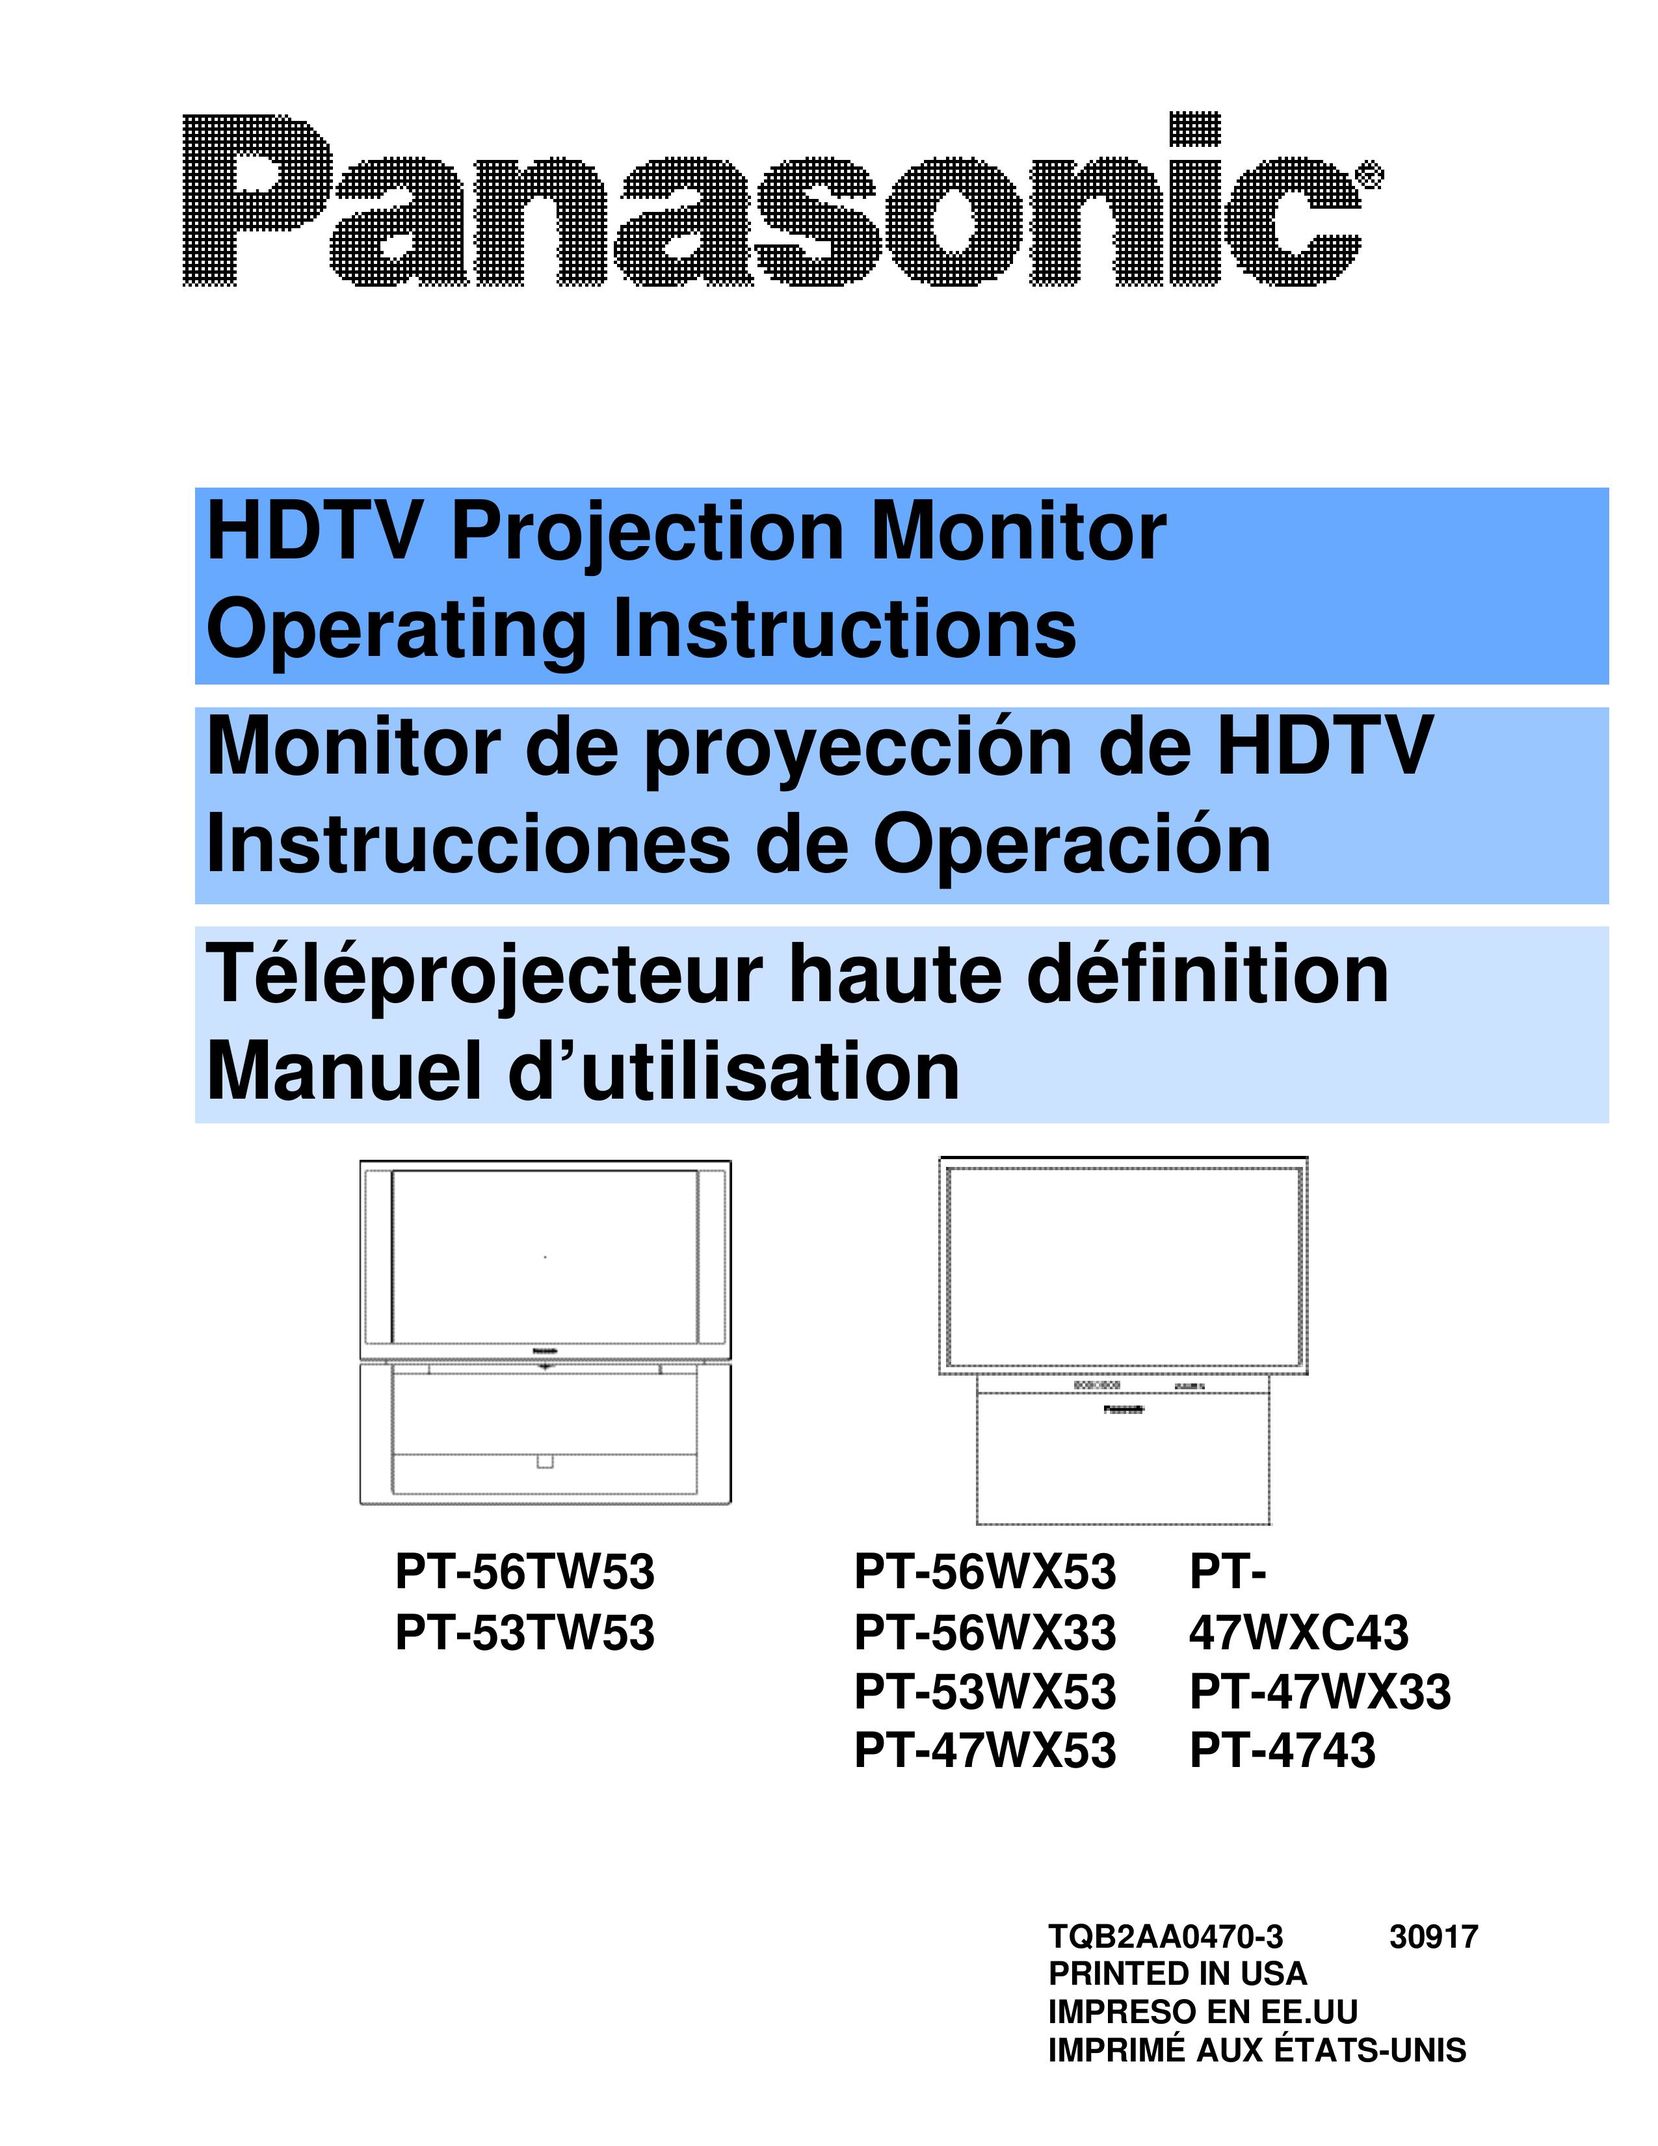 Panasonic PT-56TW53 Home Theater System User Manual